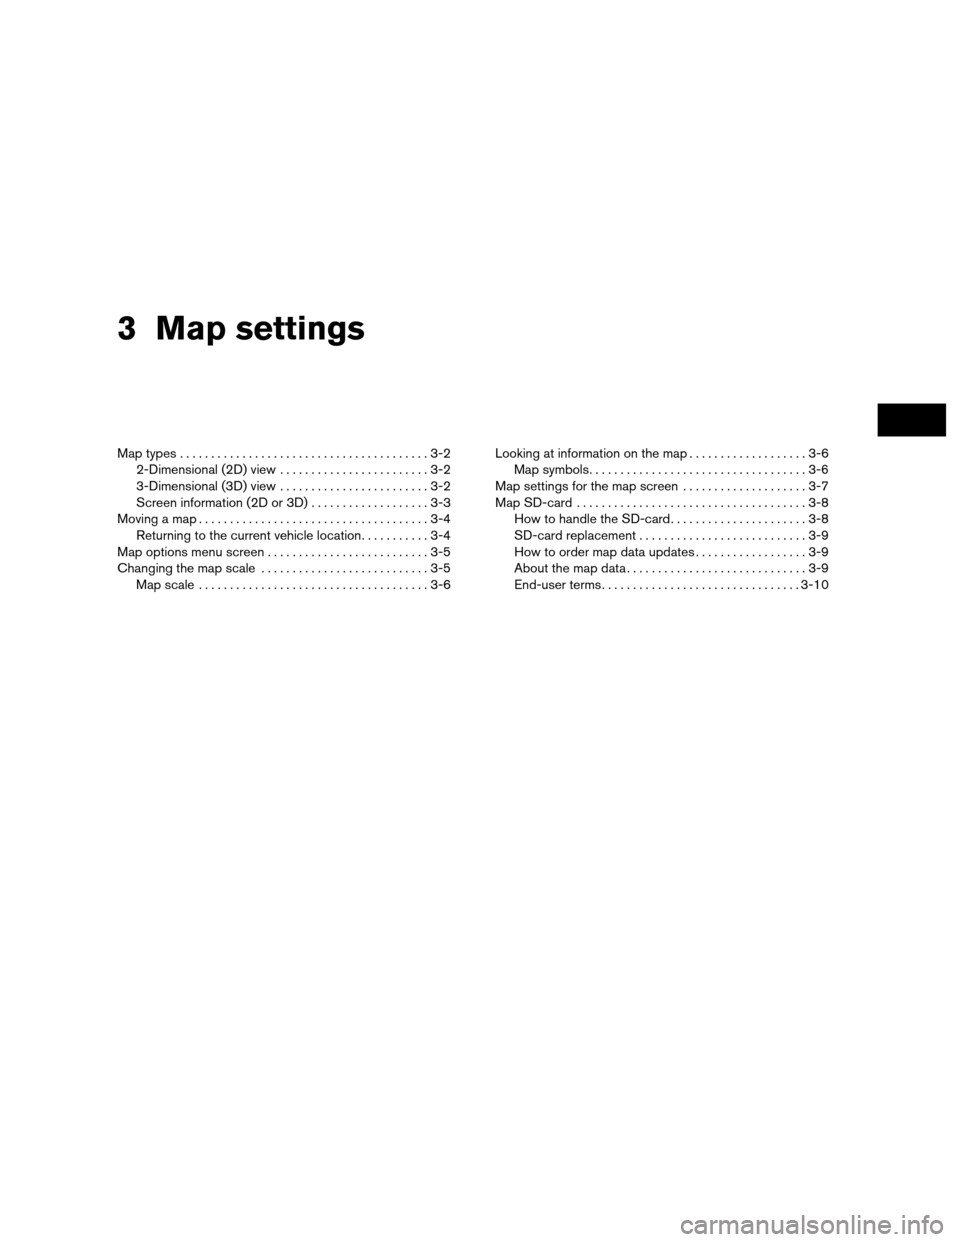 NISSAN NV200 2012 1.G LC Navigation Manual 3 Map settings
Map types........................................3-2
2-Dimensional (2D) view ........................3-2
3-Dimensional (3D) view ........................3-2
Screen information (2D or 3D